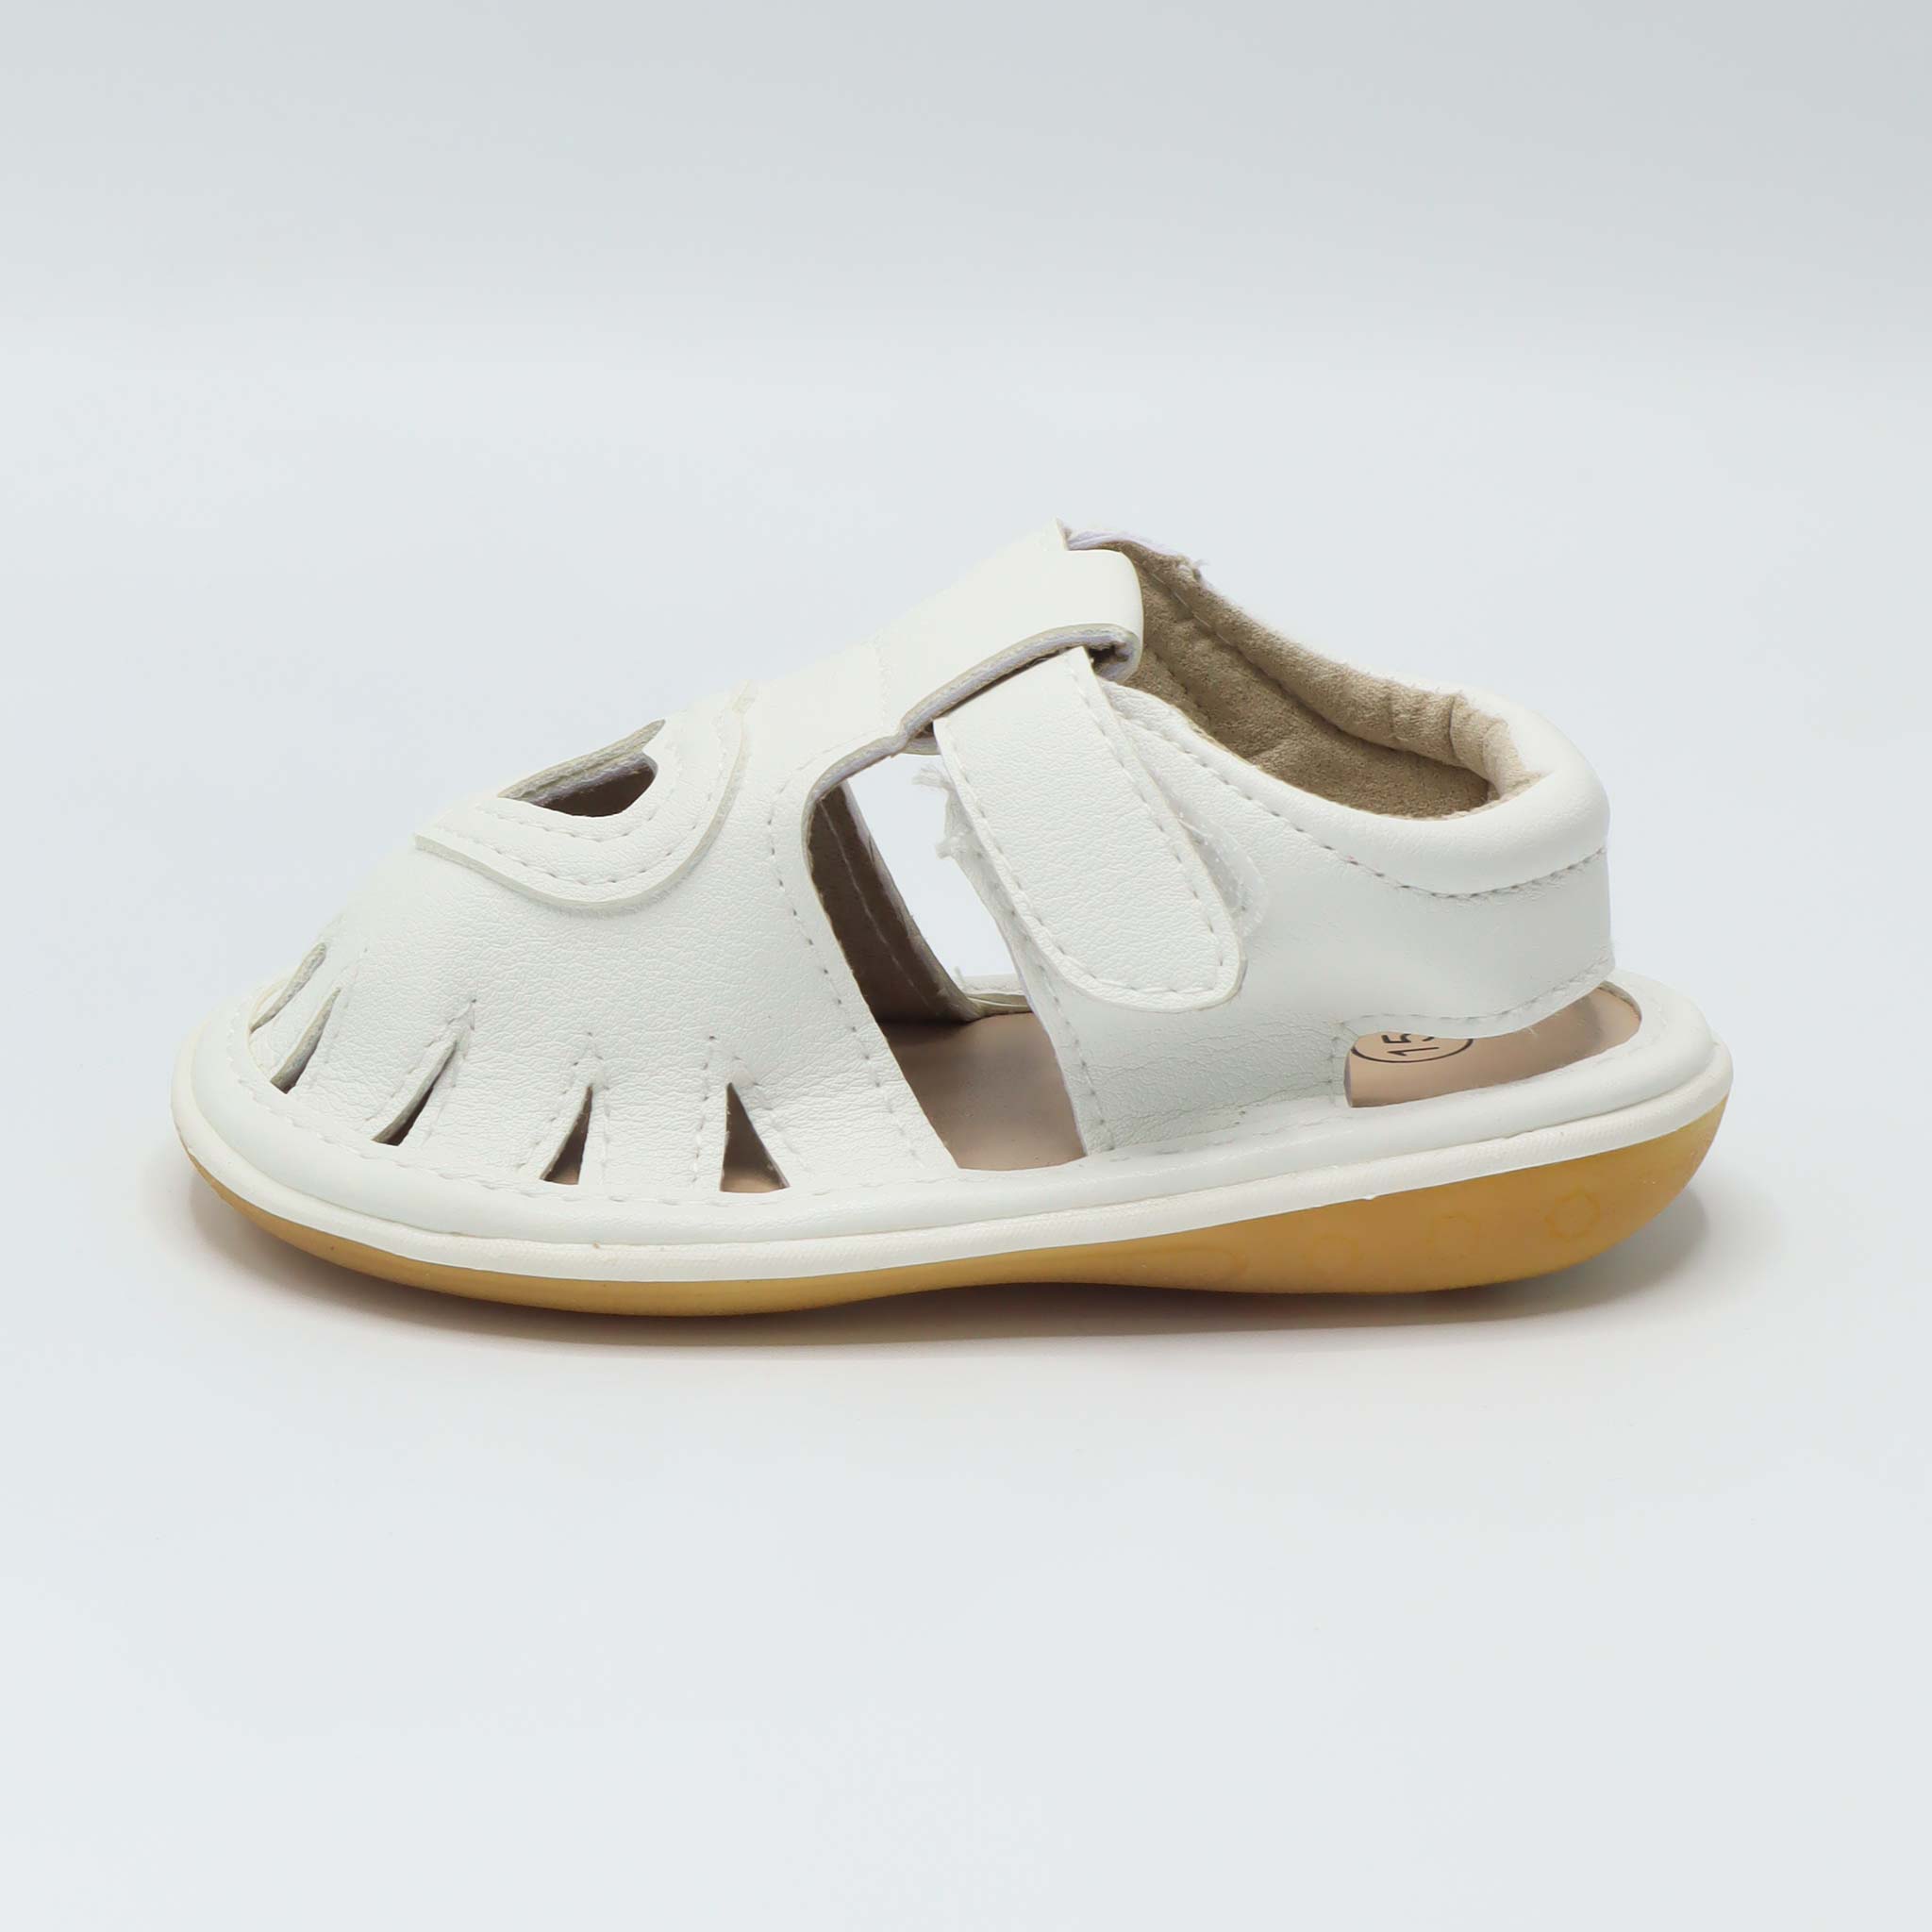 Baby Sandals White Color Heart Pattern